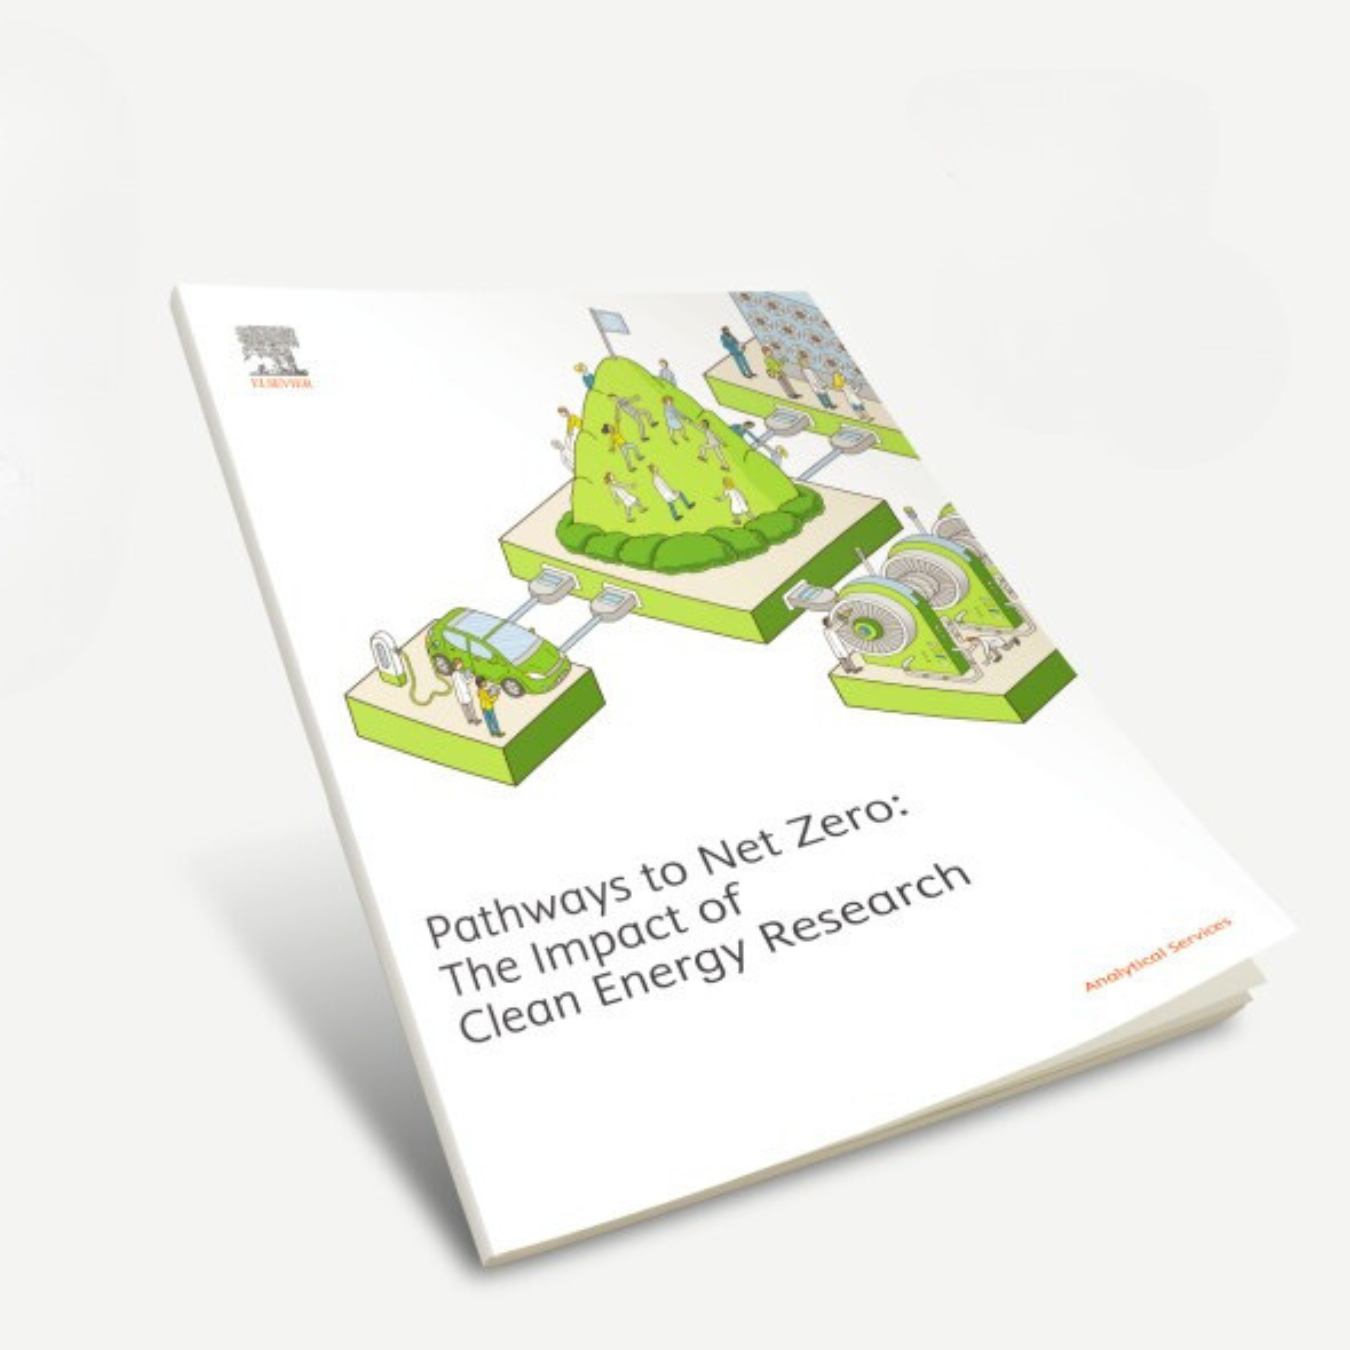 Image of Elsevier's Pathways to Net Zero Report front cover 